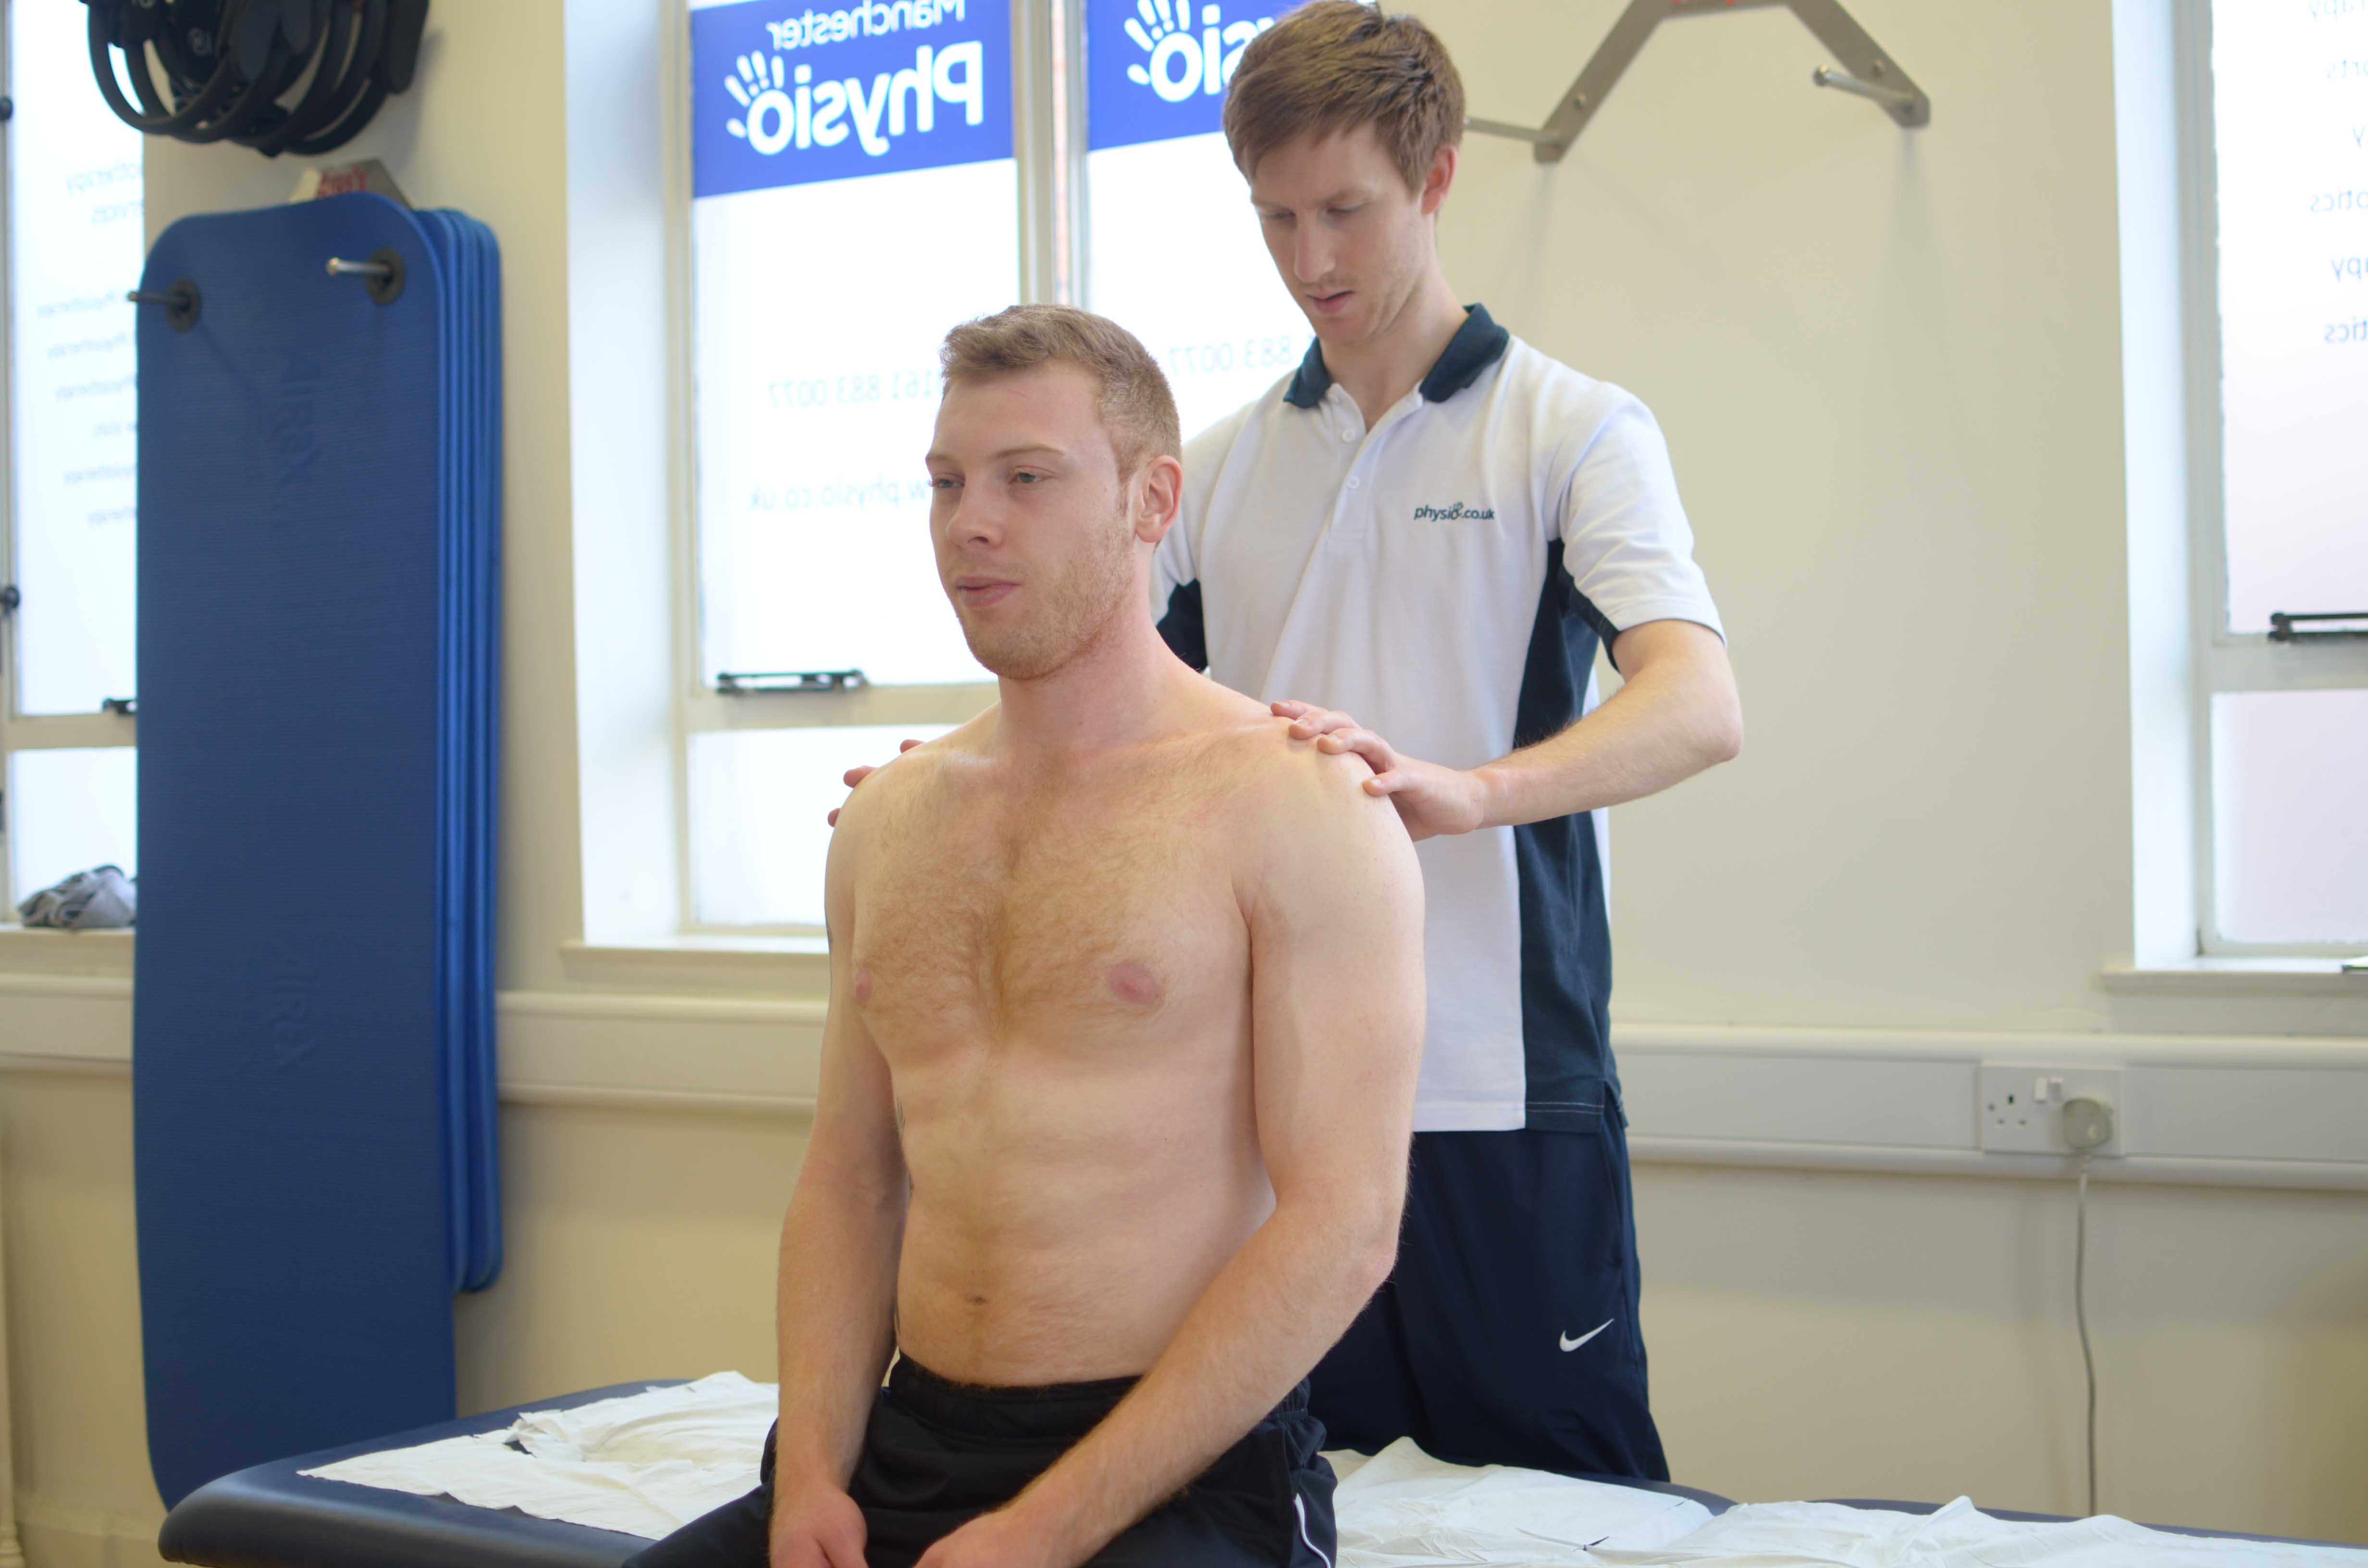 Active cycle of breathing exercises supervised by a specialist physiotherapist